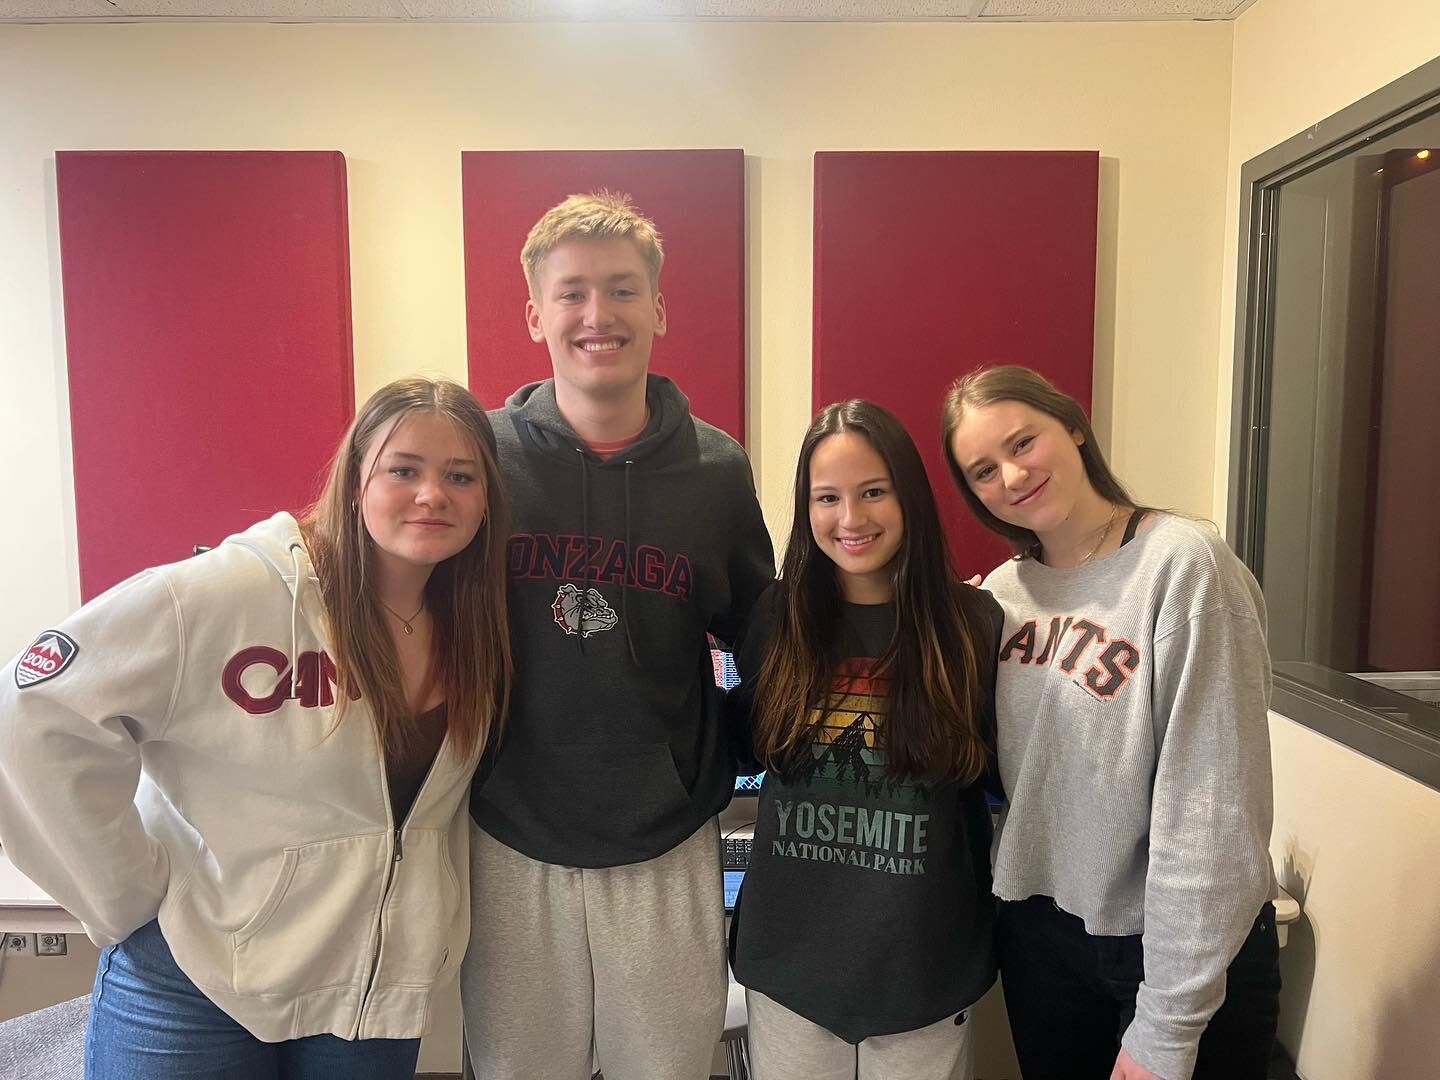 And that&rsquo;s a wrap for Breakfast on the bridge this morning! Hosted by Sophie C and Andrew, they discussed everything from Drake to modern day economics. Tune in next week to hear breakfast on the bridge at 7am every tuesday!!